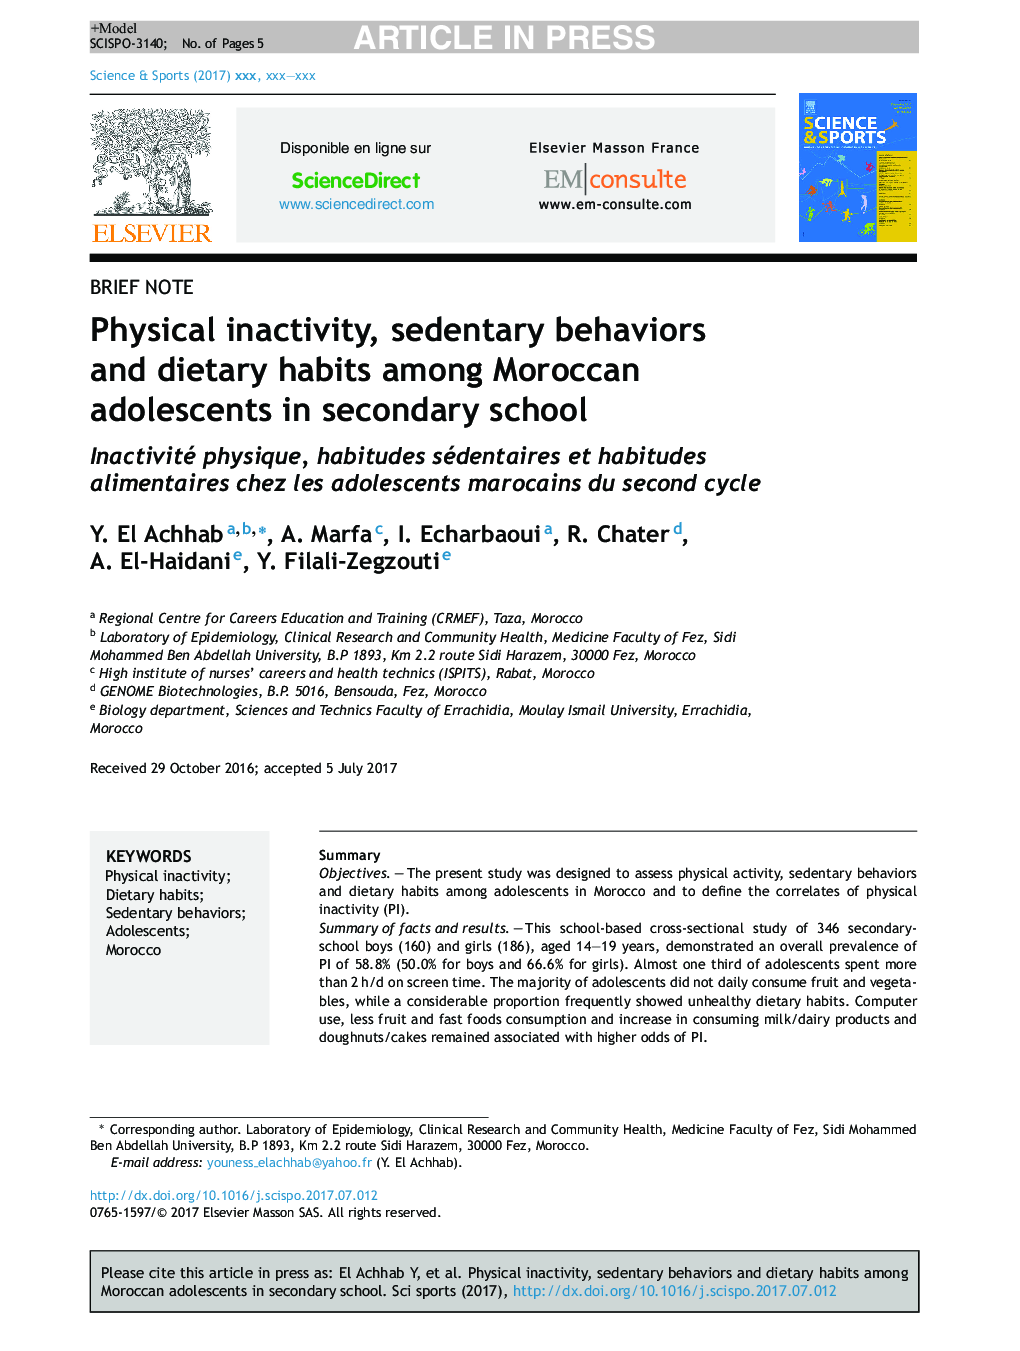 Physical inactivity, sedentary behaviors and dietary habits among Moroccan adolescents in secondary school